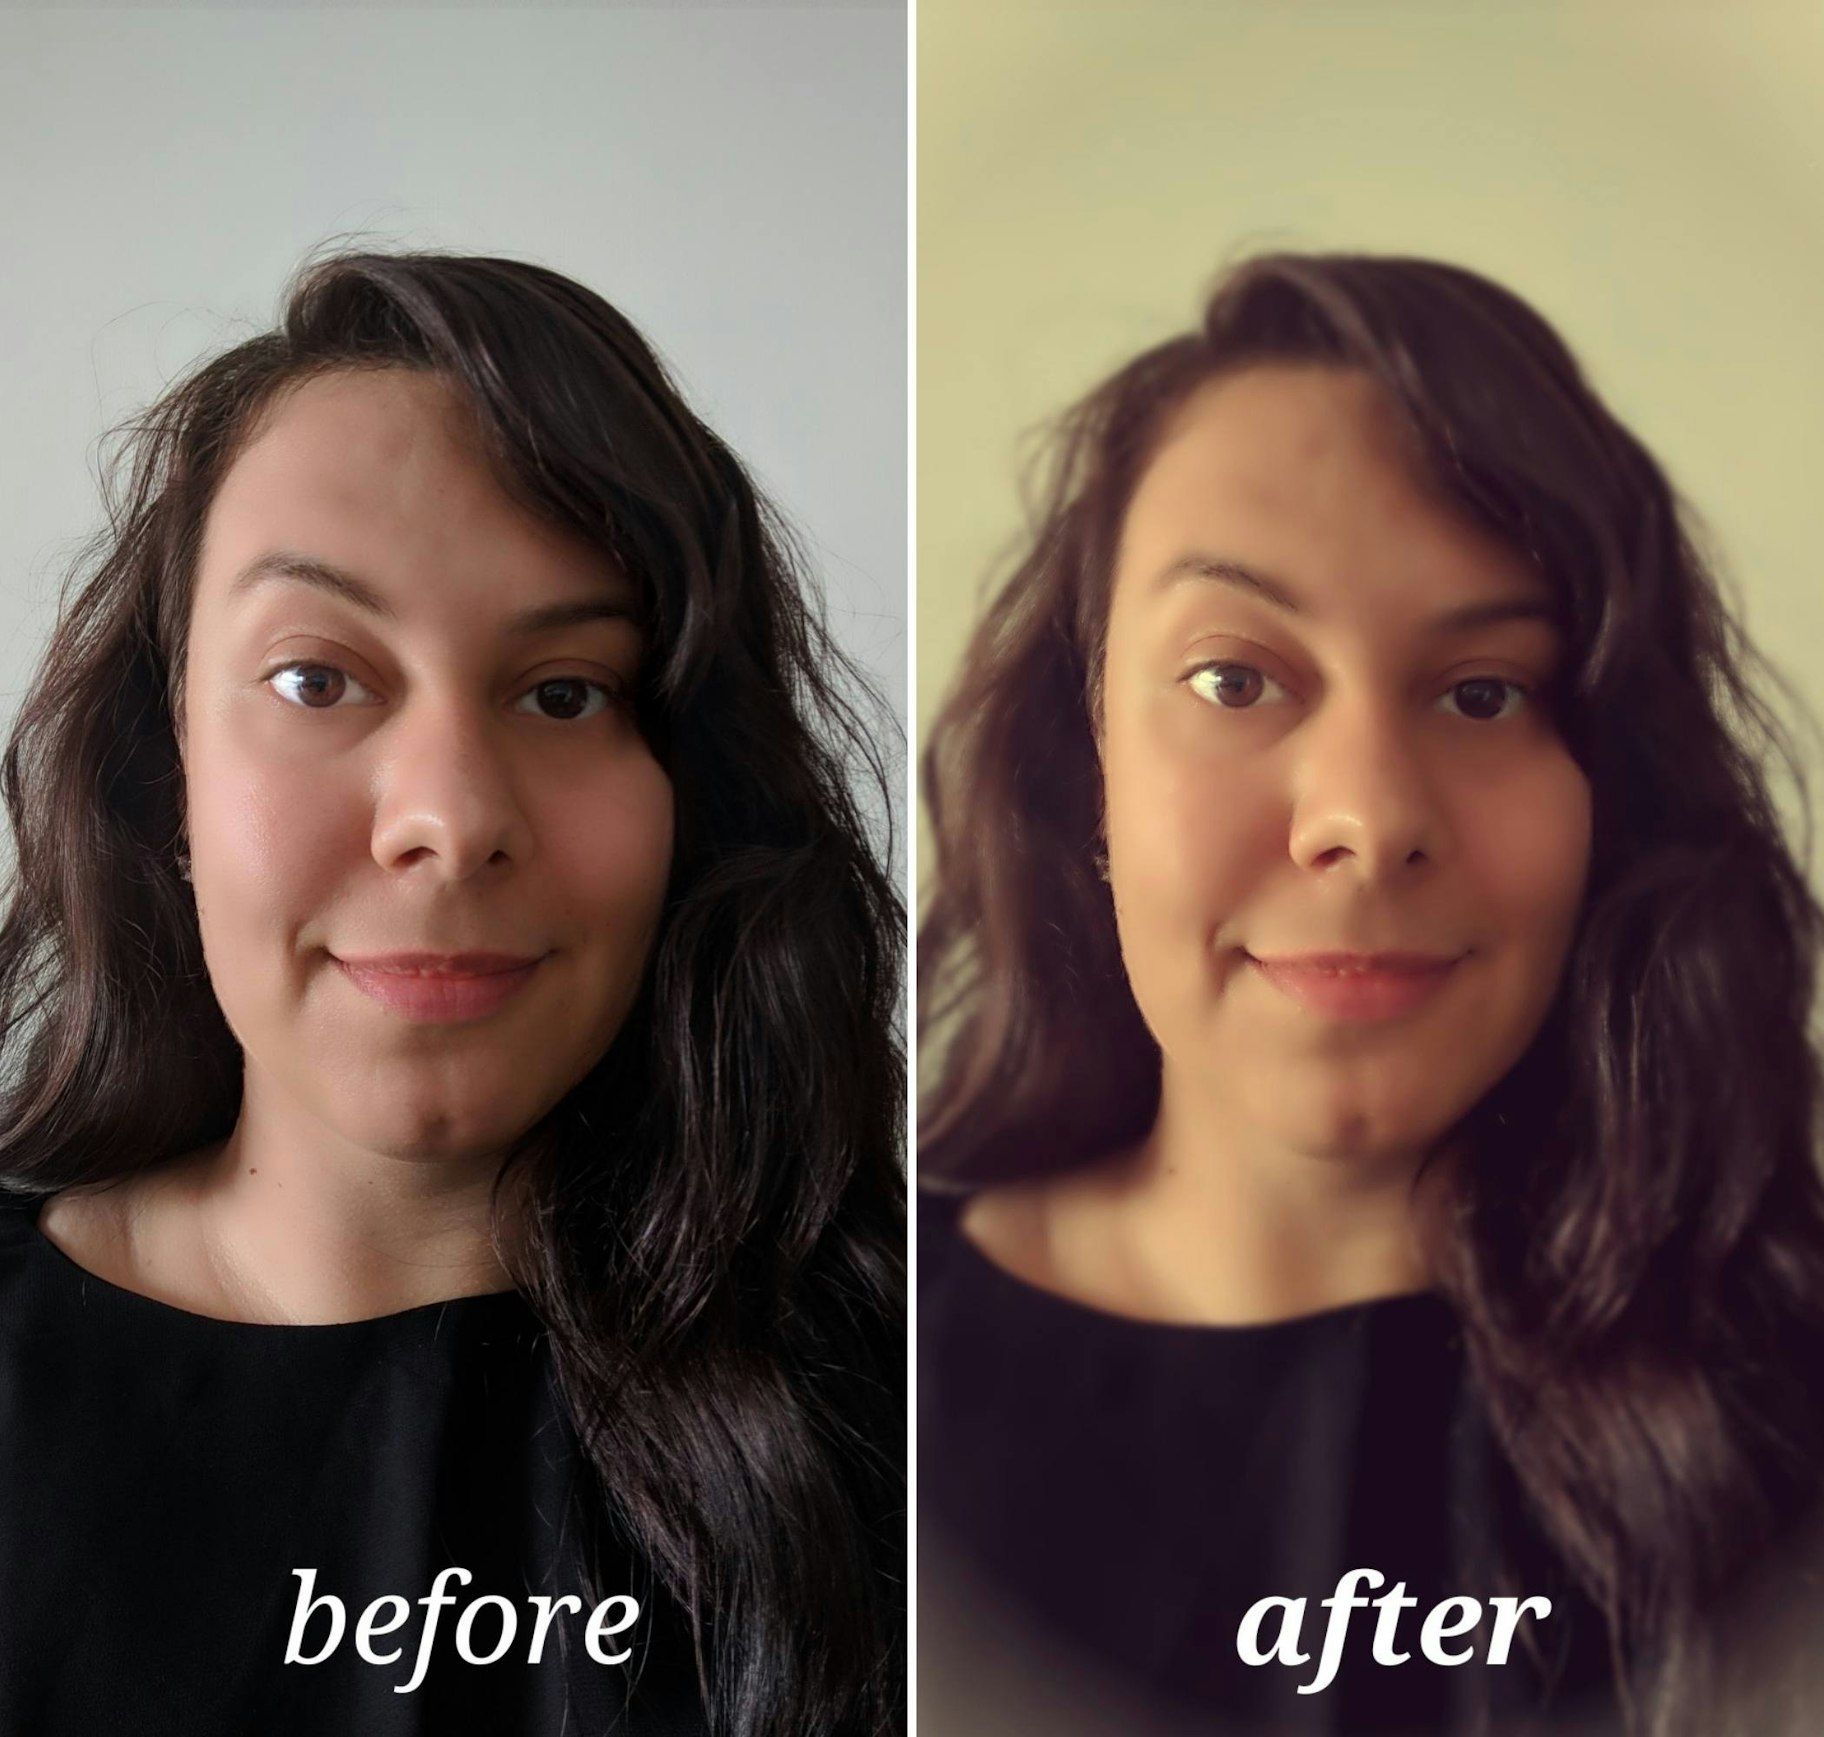 Pixlr before and after editing